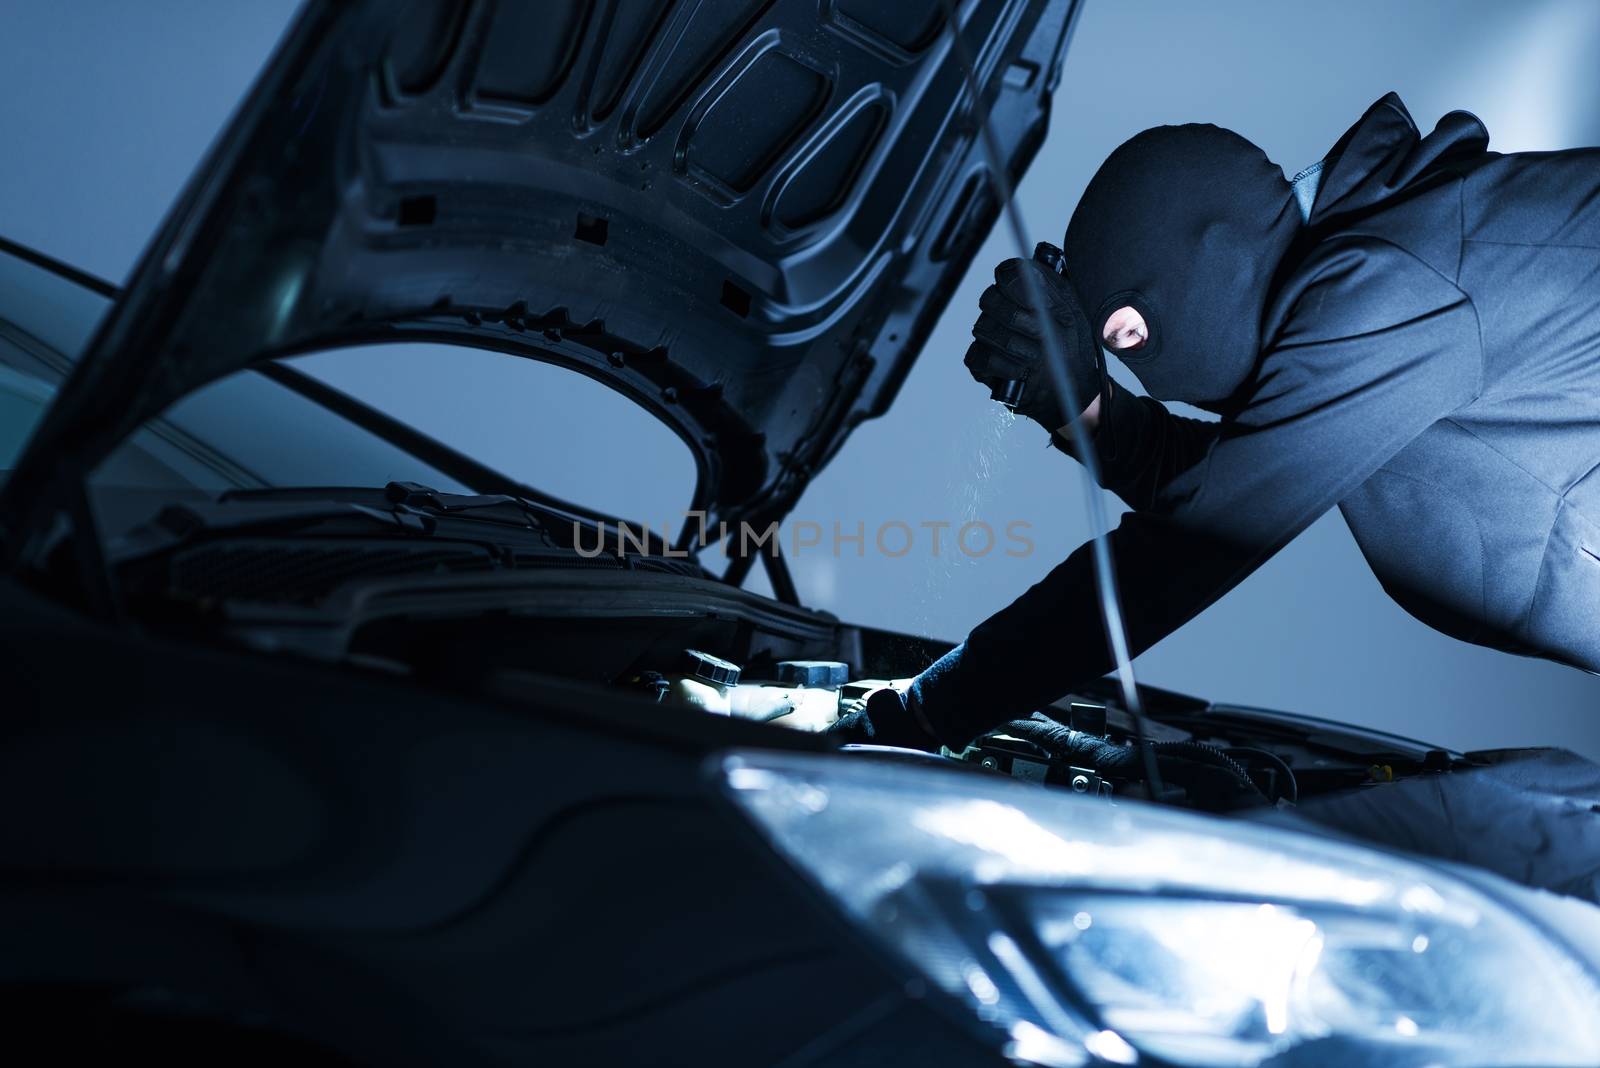 Robber Disabling Car Alarm. Car Robber Looking To Disarm Car Security Systems Under the Car Hood. 